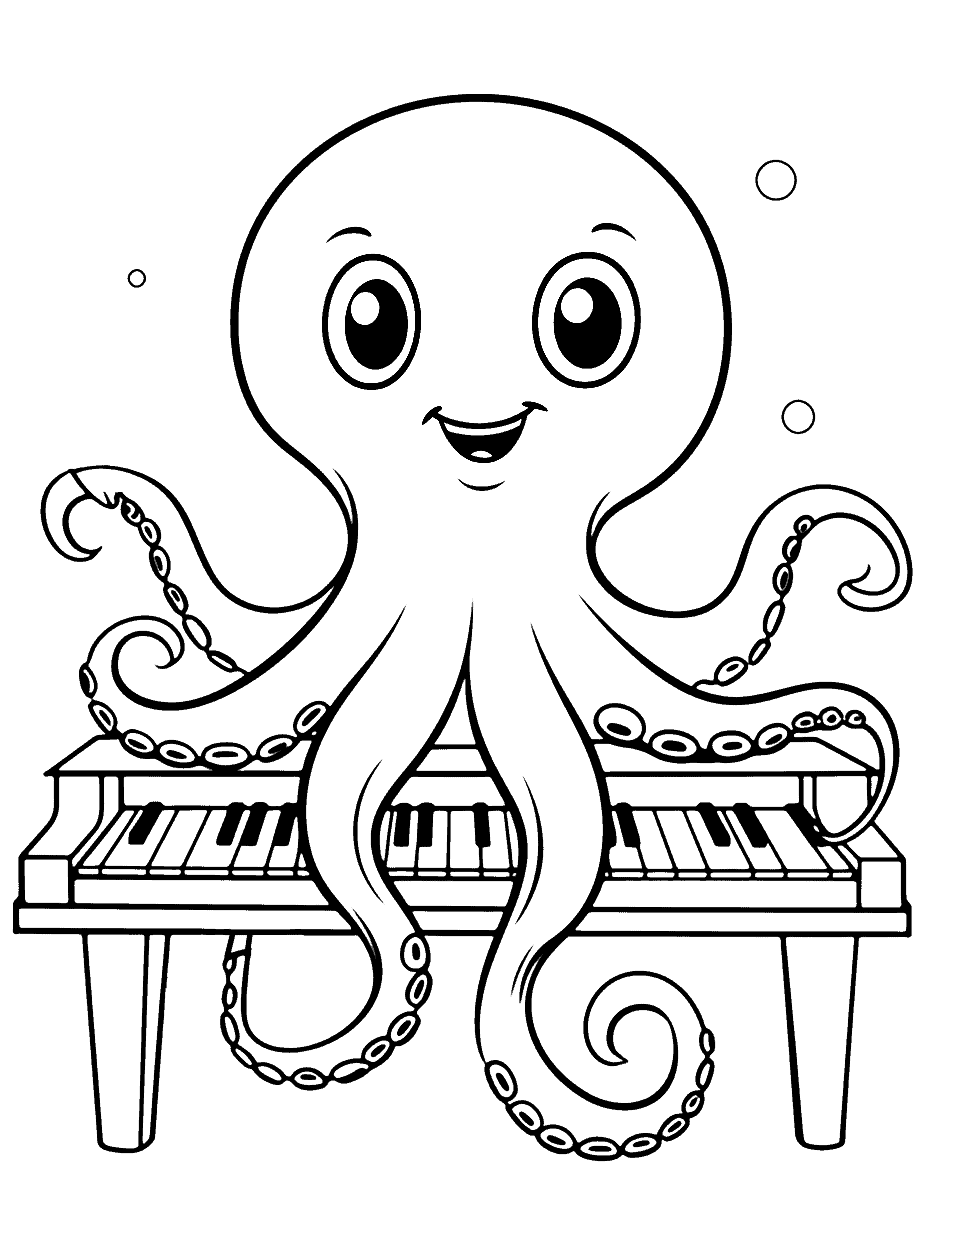 Octopus and the Piano Coloring Page - An octopus with a grand piano ready to perform a musical.